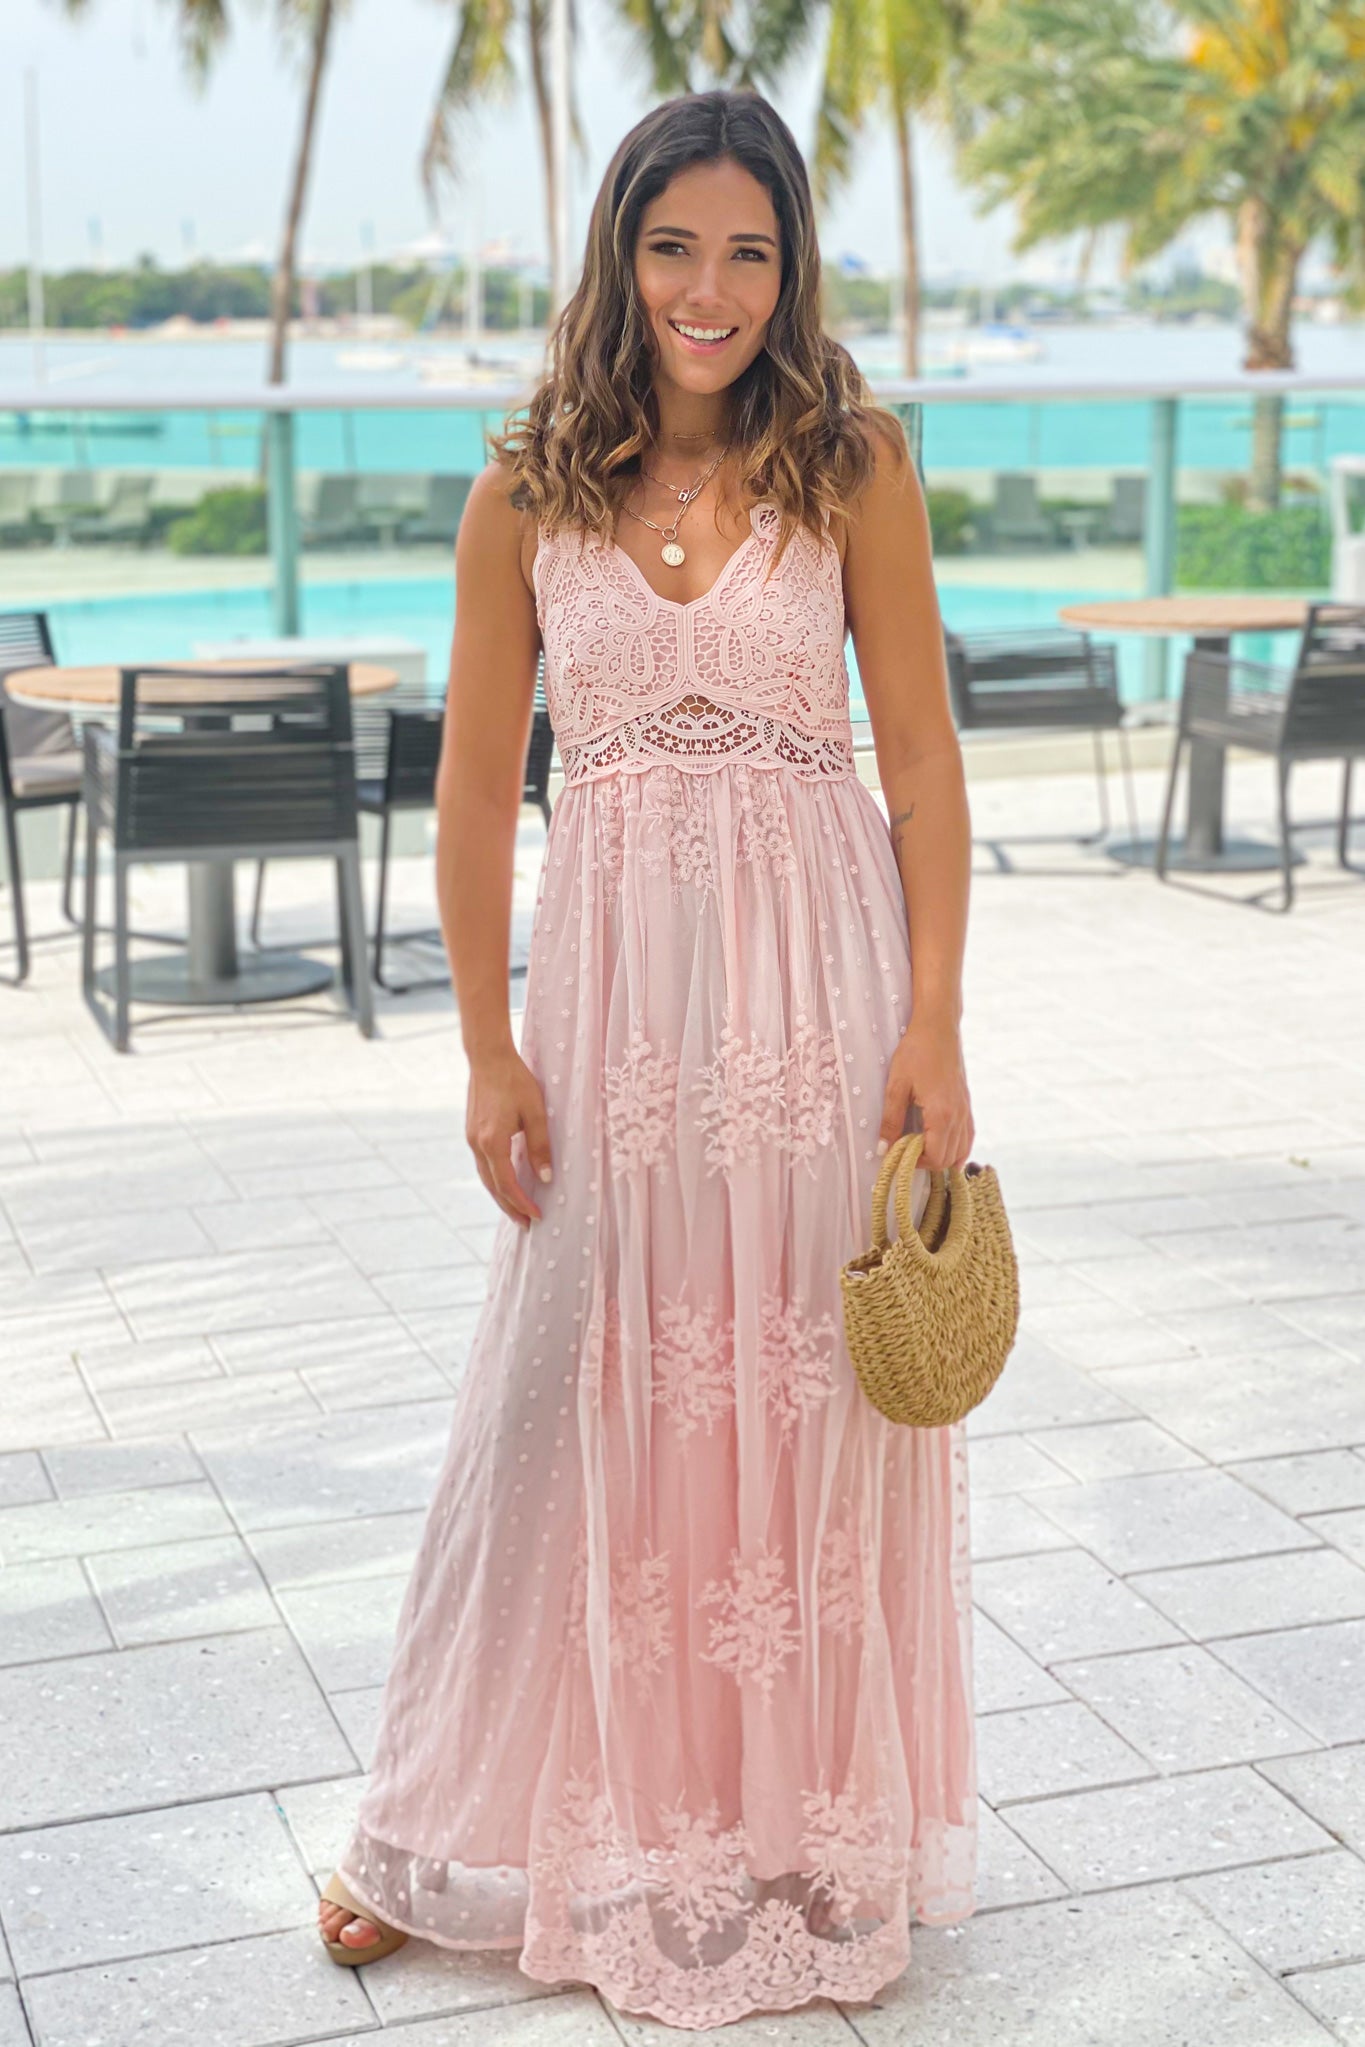 Blush Lace Maxi Dress With Crochet Top ...